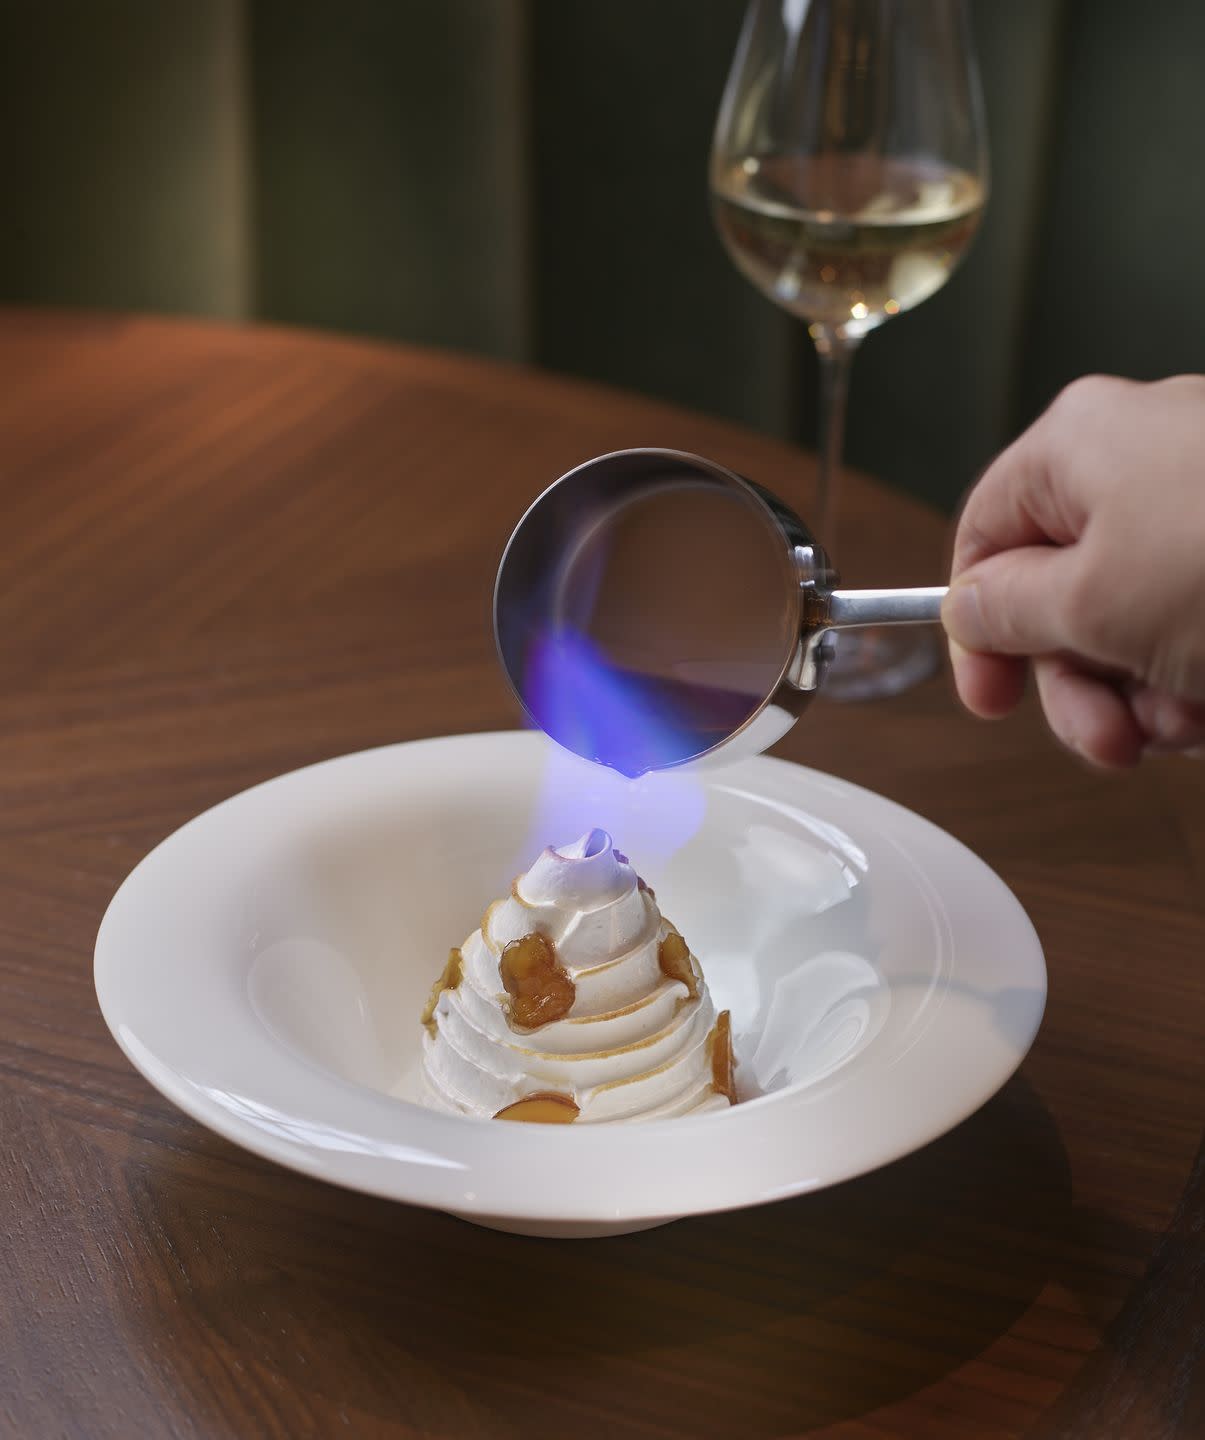 baked mont blanc at cafe boulud